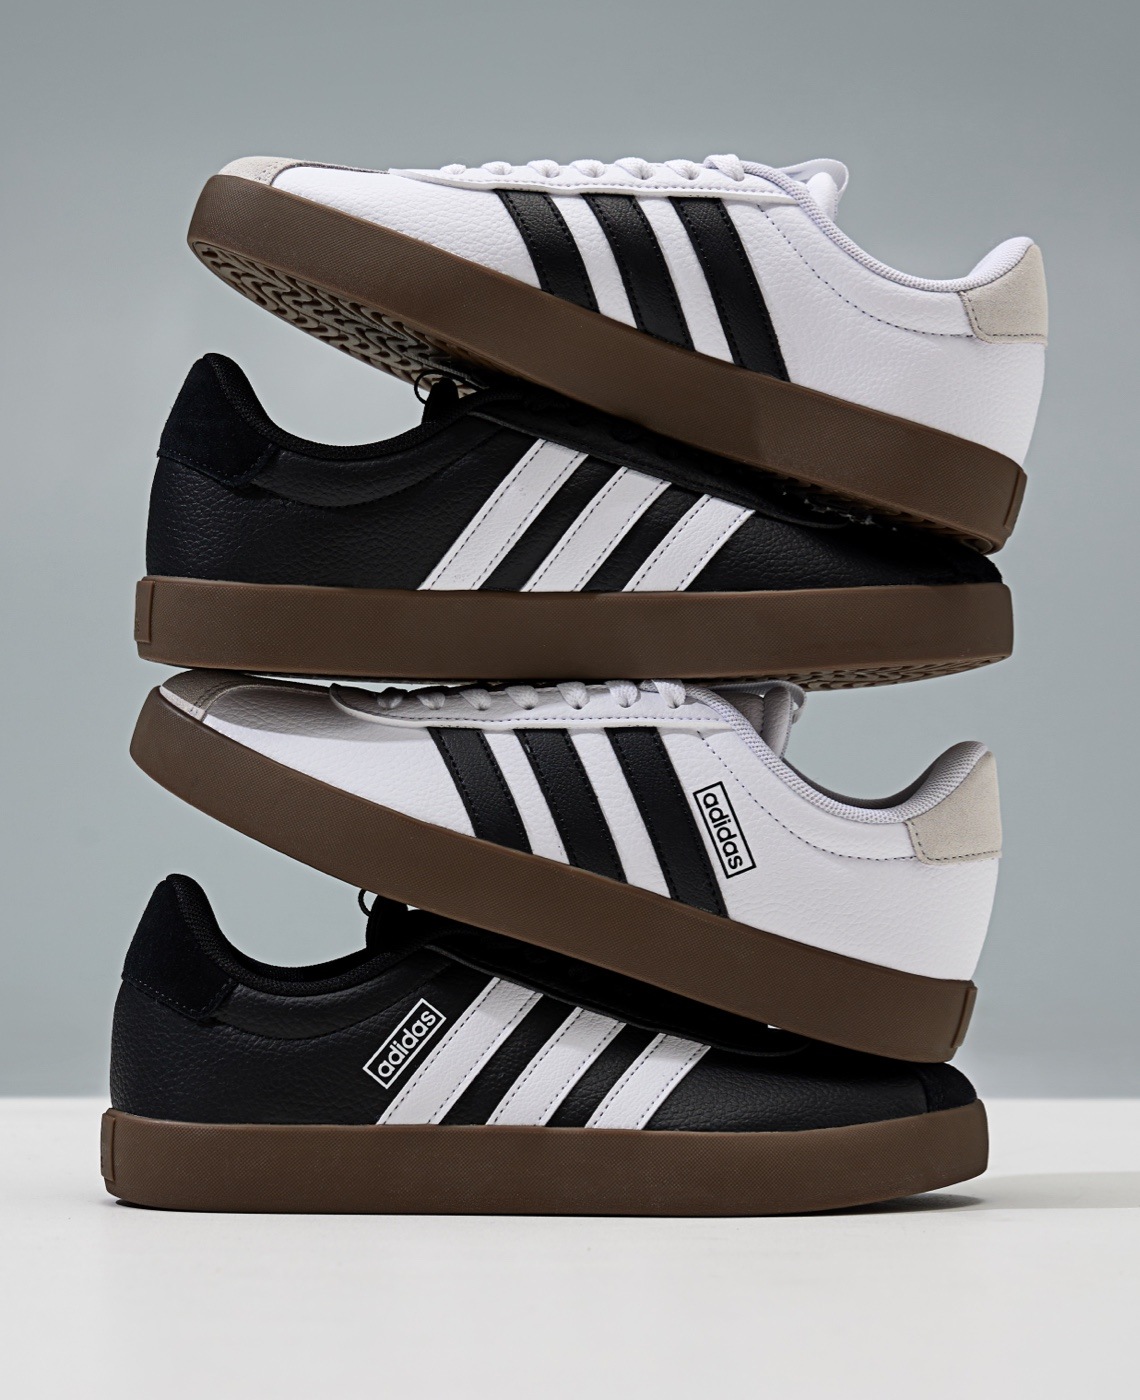 black and white adidas court shoes